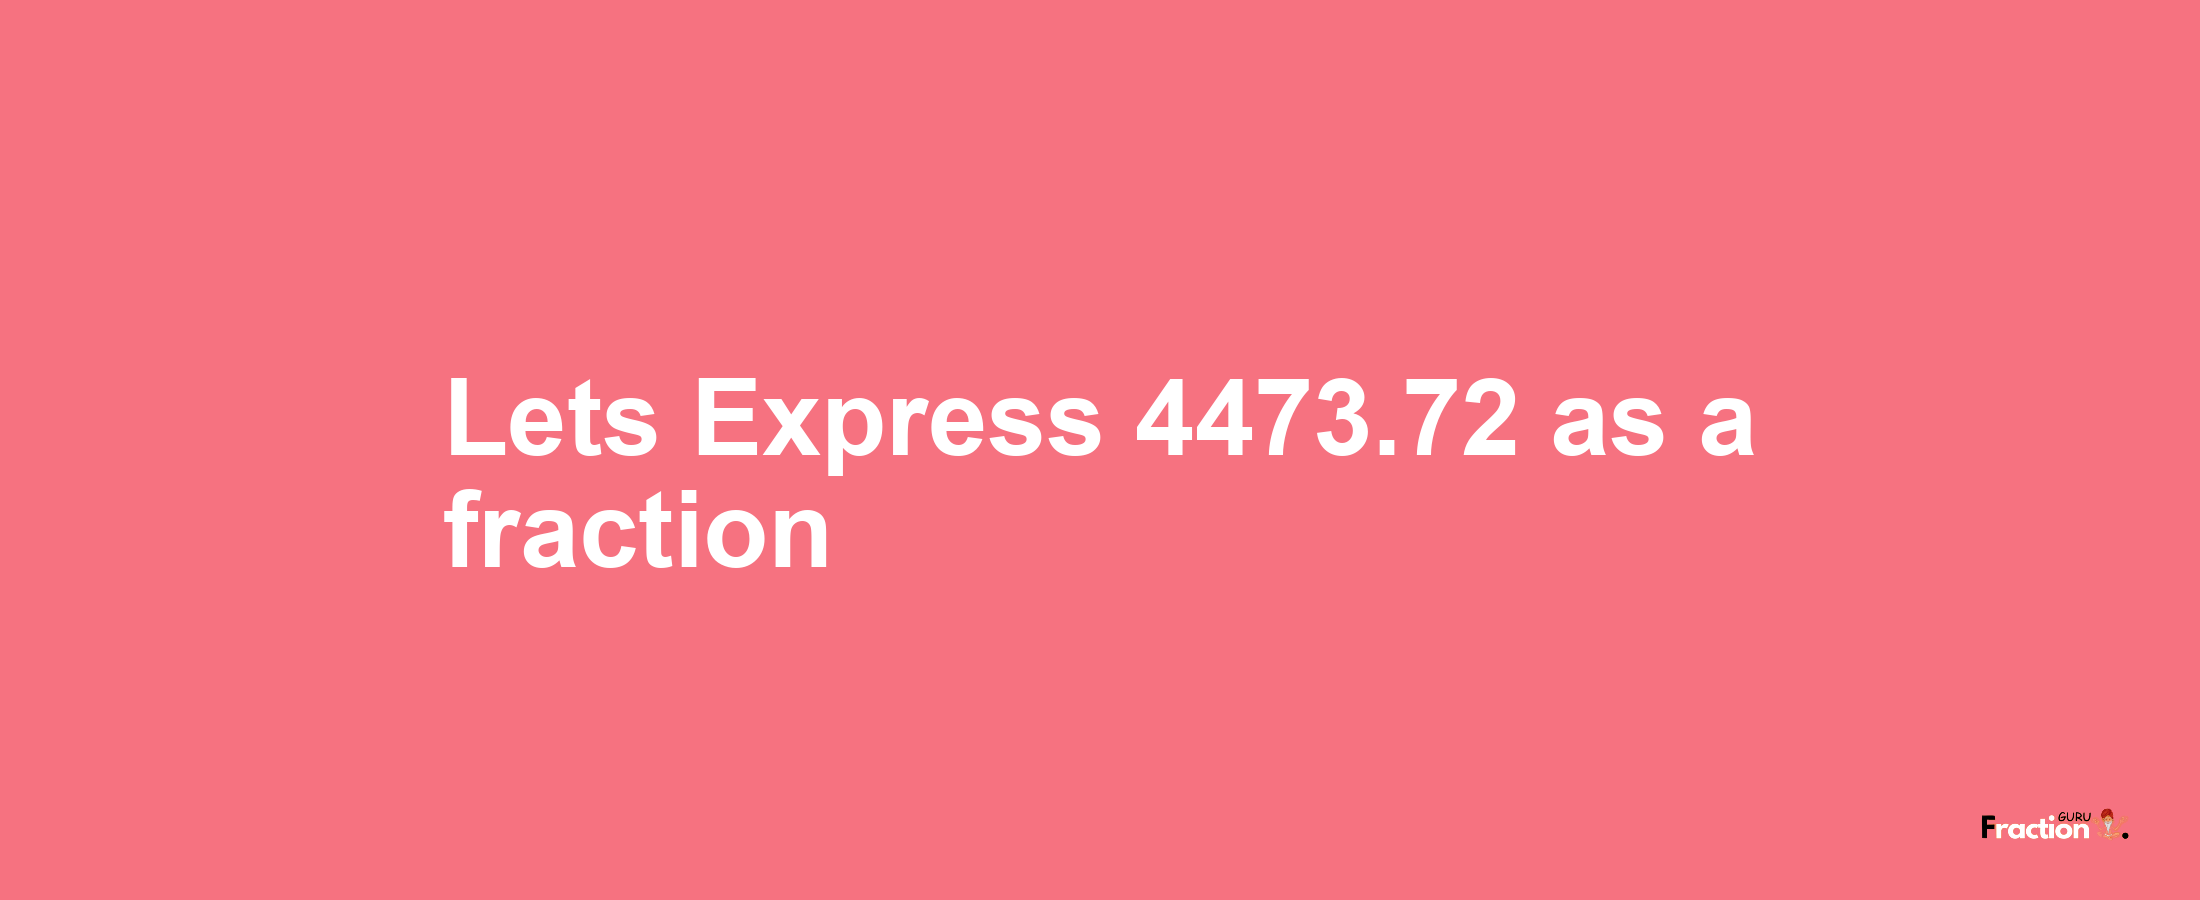 Lets Express 4473.72 as afraction